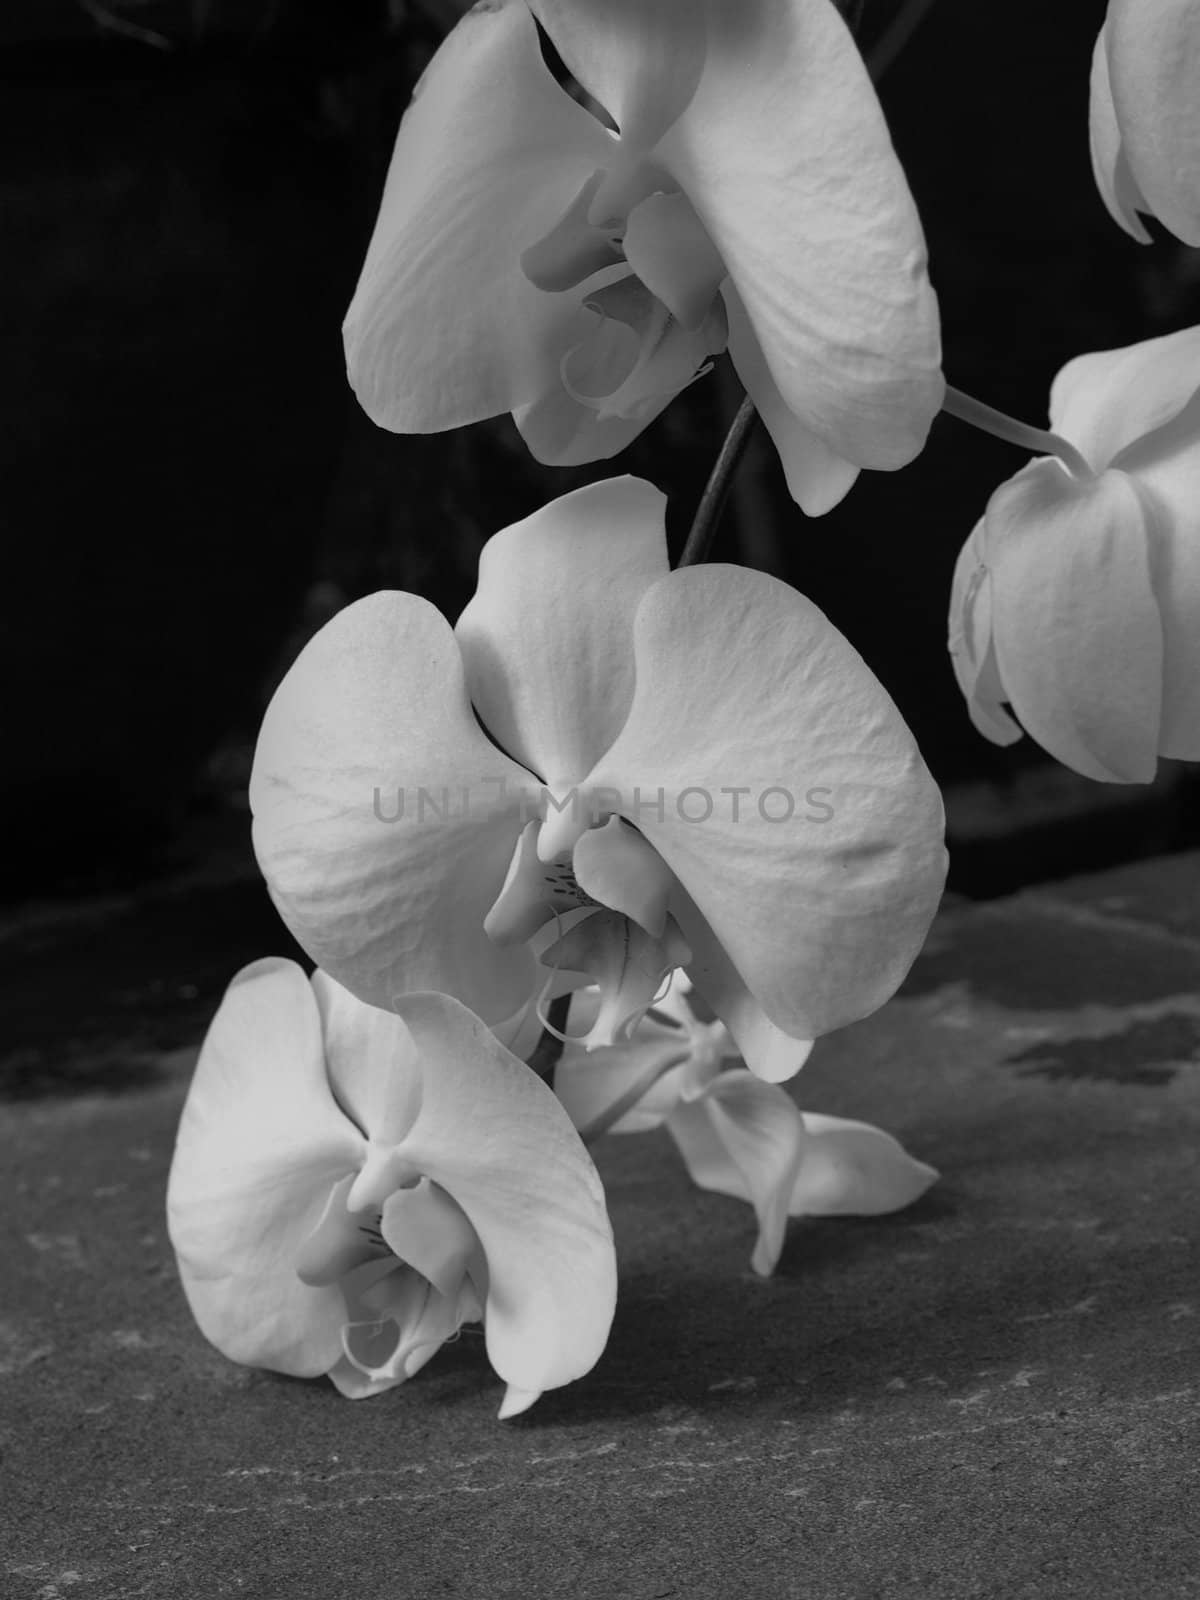 Orchids shown up close and in black and white